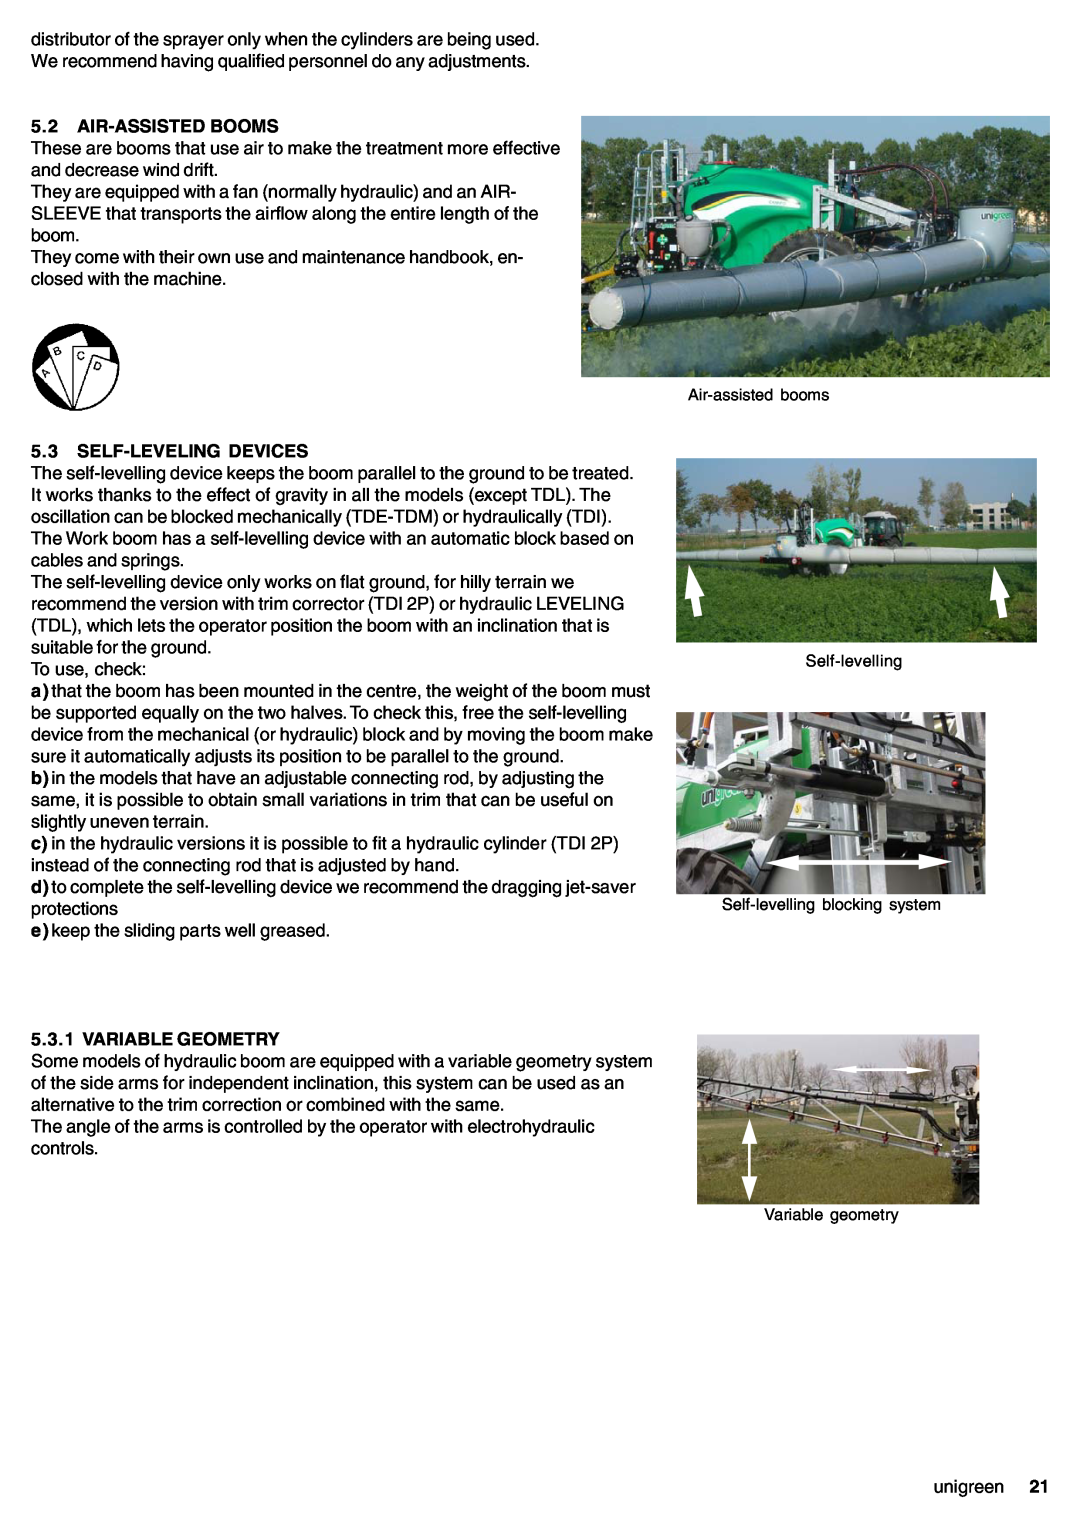 Unigreen 16, 22, 11, 32 manual 5.2AIR-ASSISTEDBOOMS, 5.3SELF-LEVELINGDEVICES, Variable Geometry 